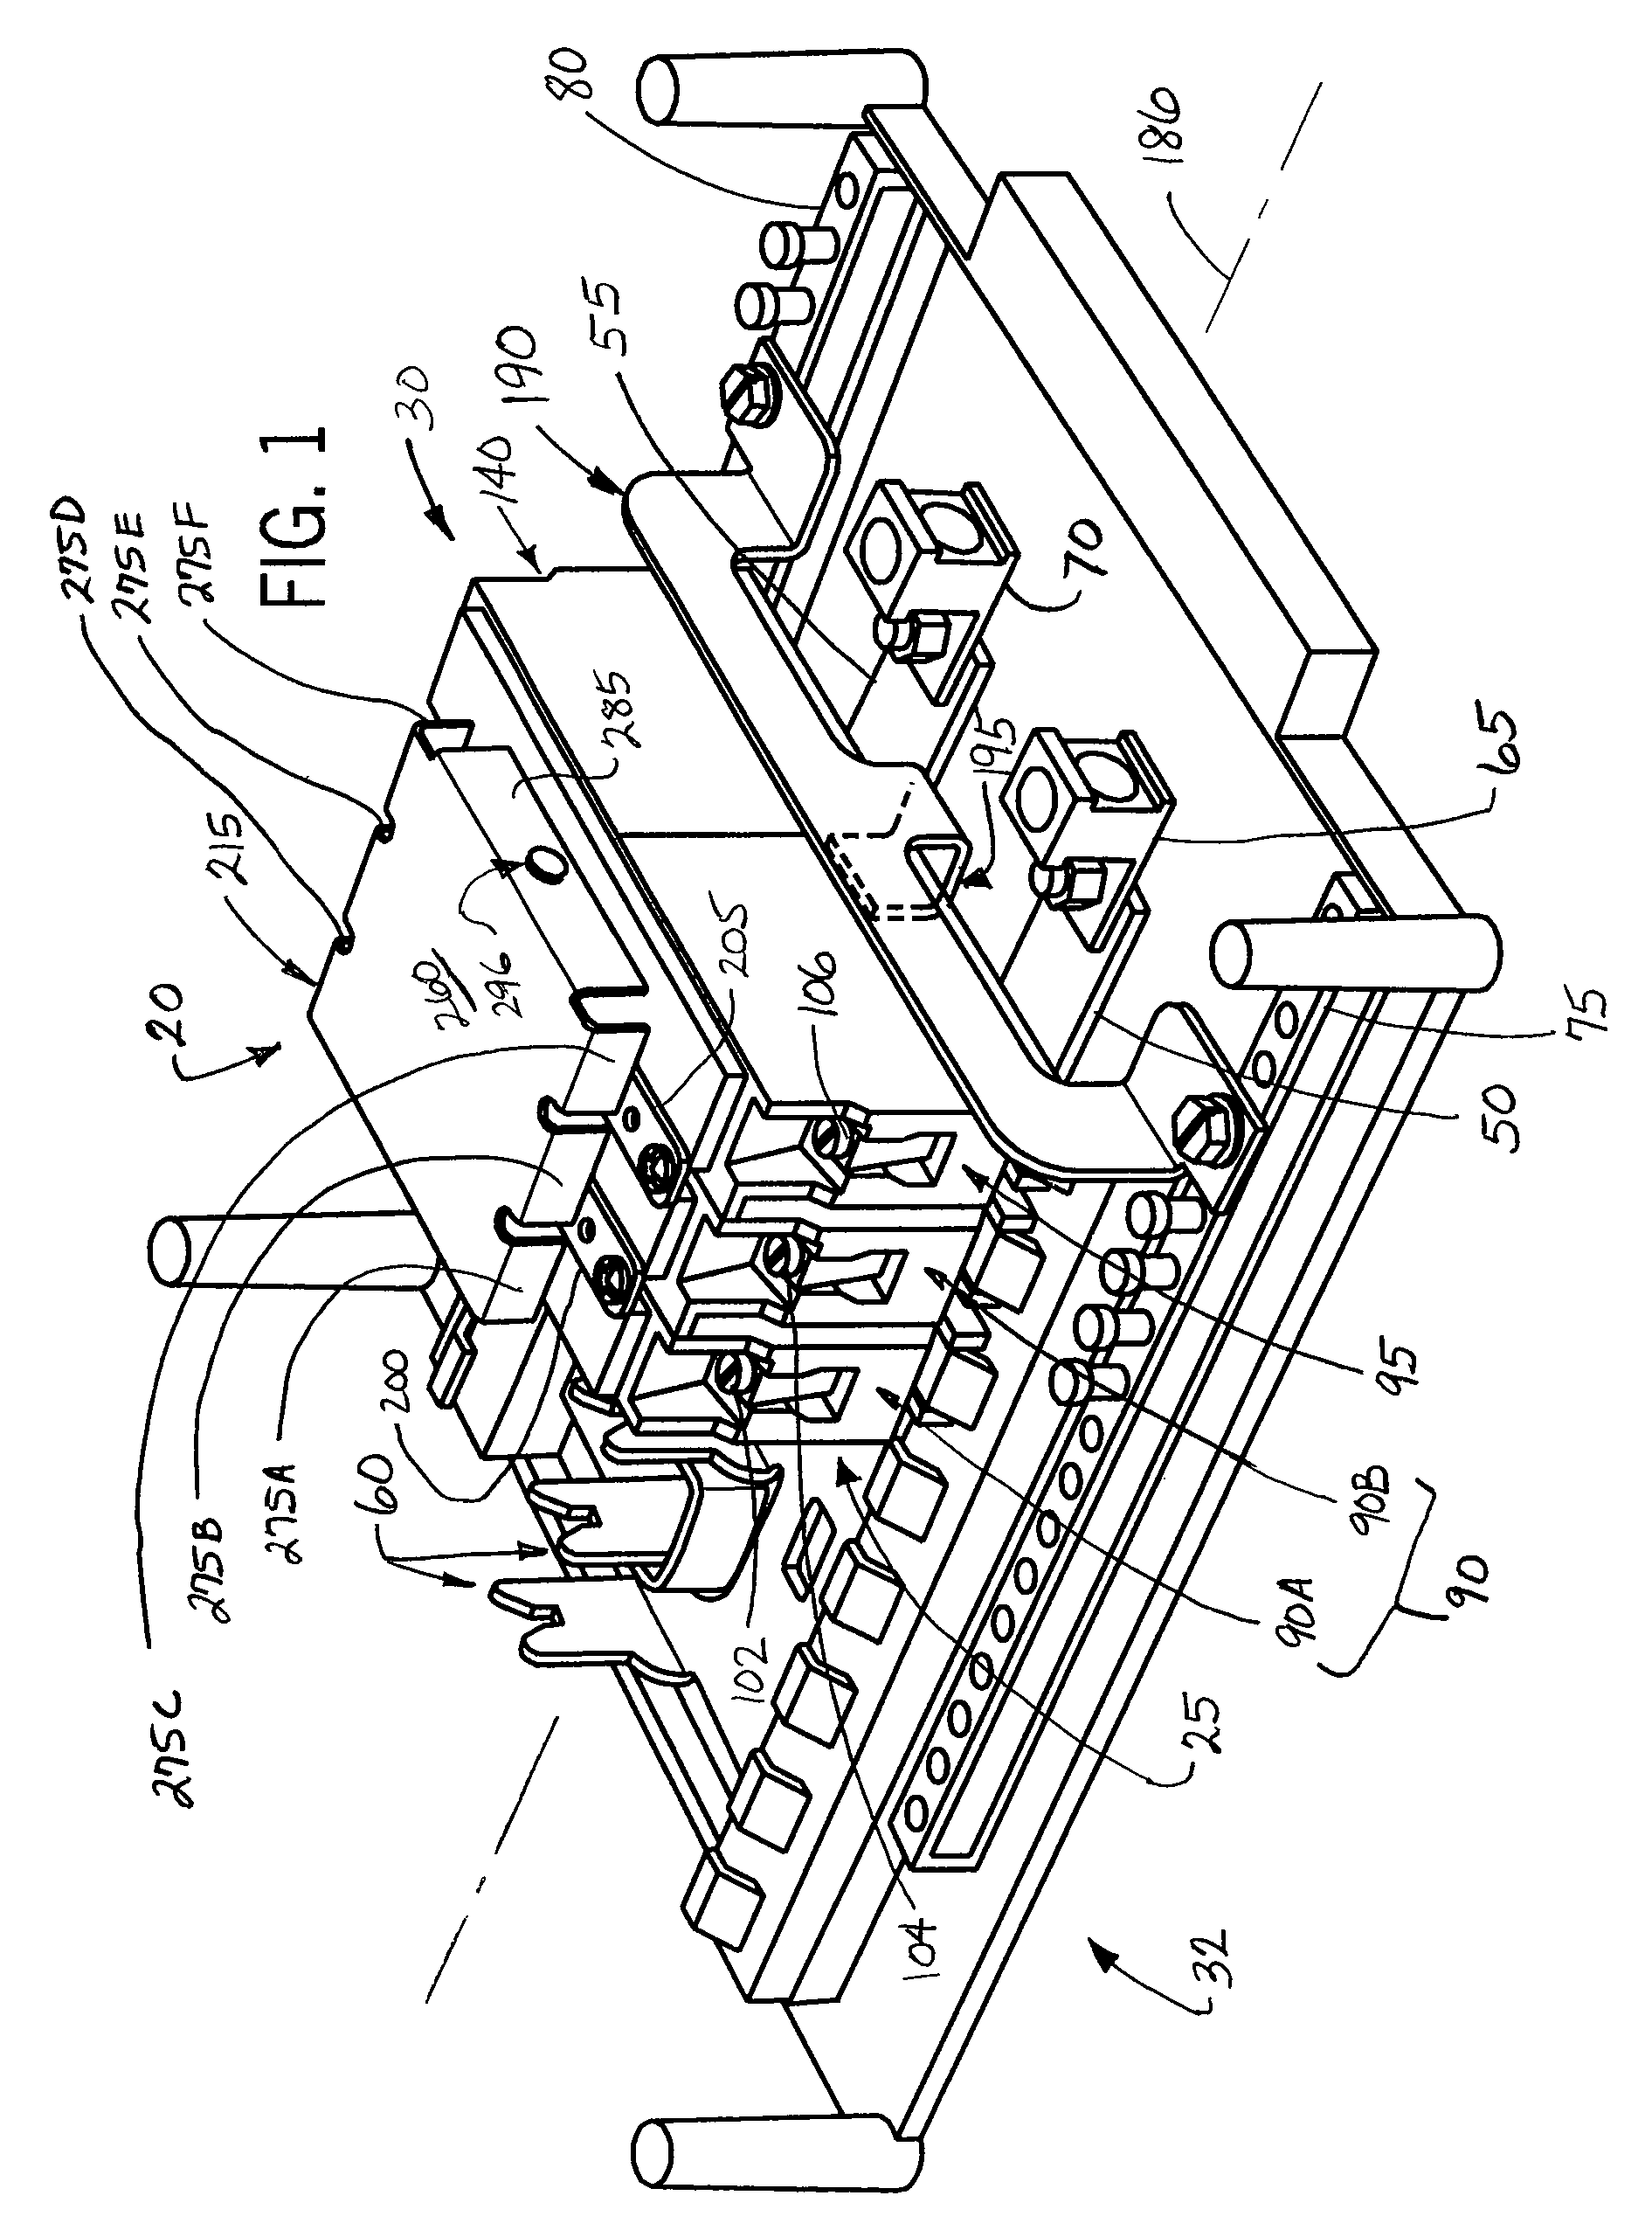 Method of sequentially actuating power supply switches including a neutrally connected switch